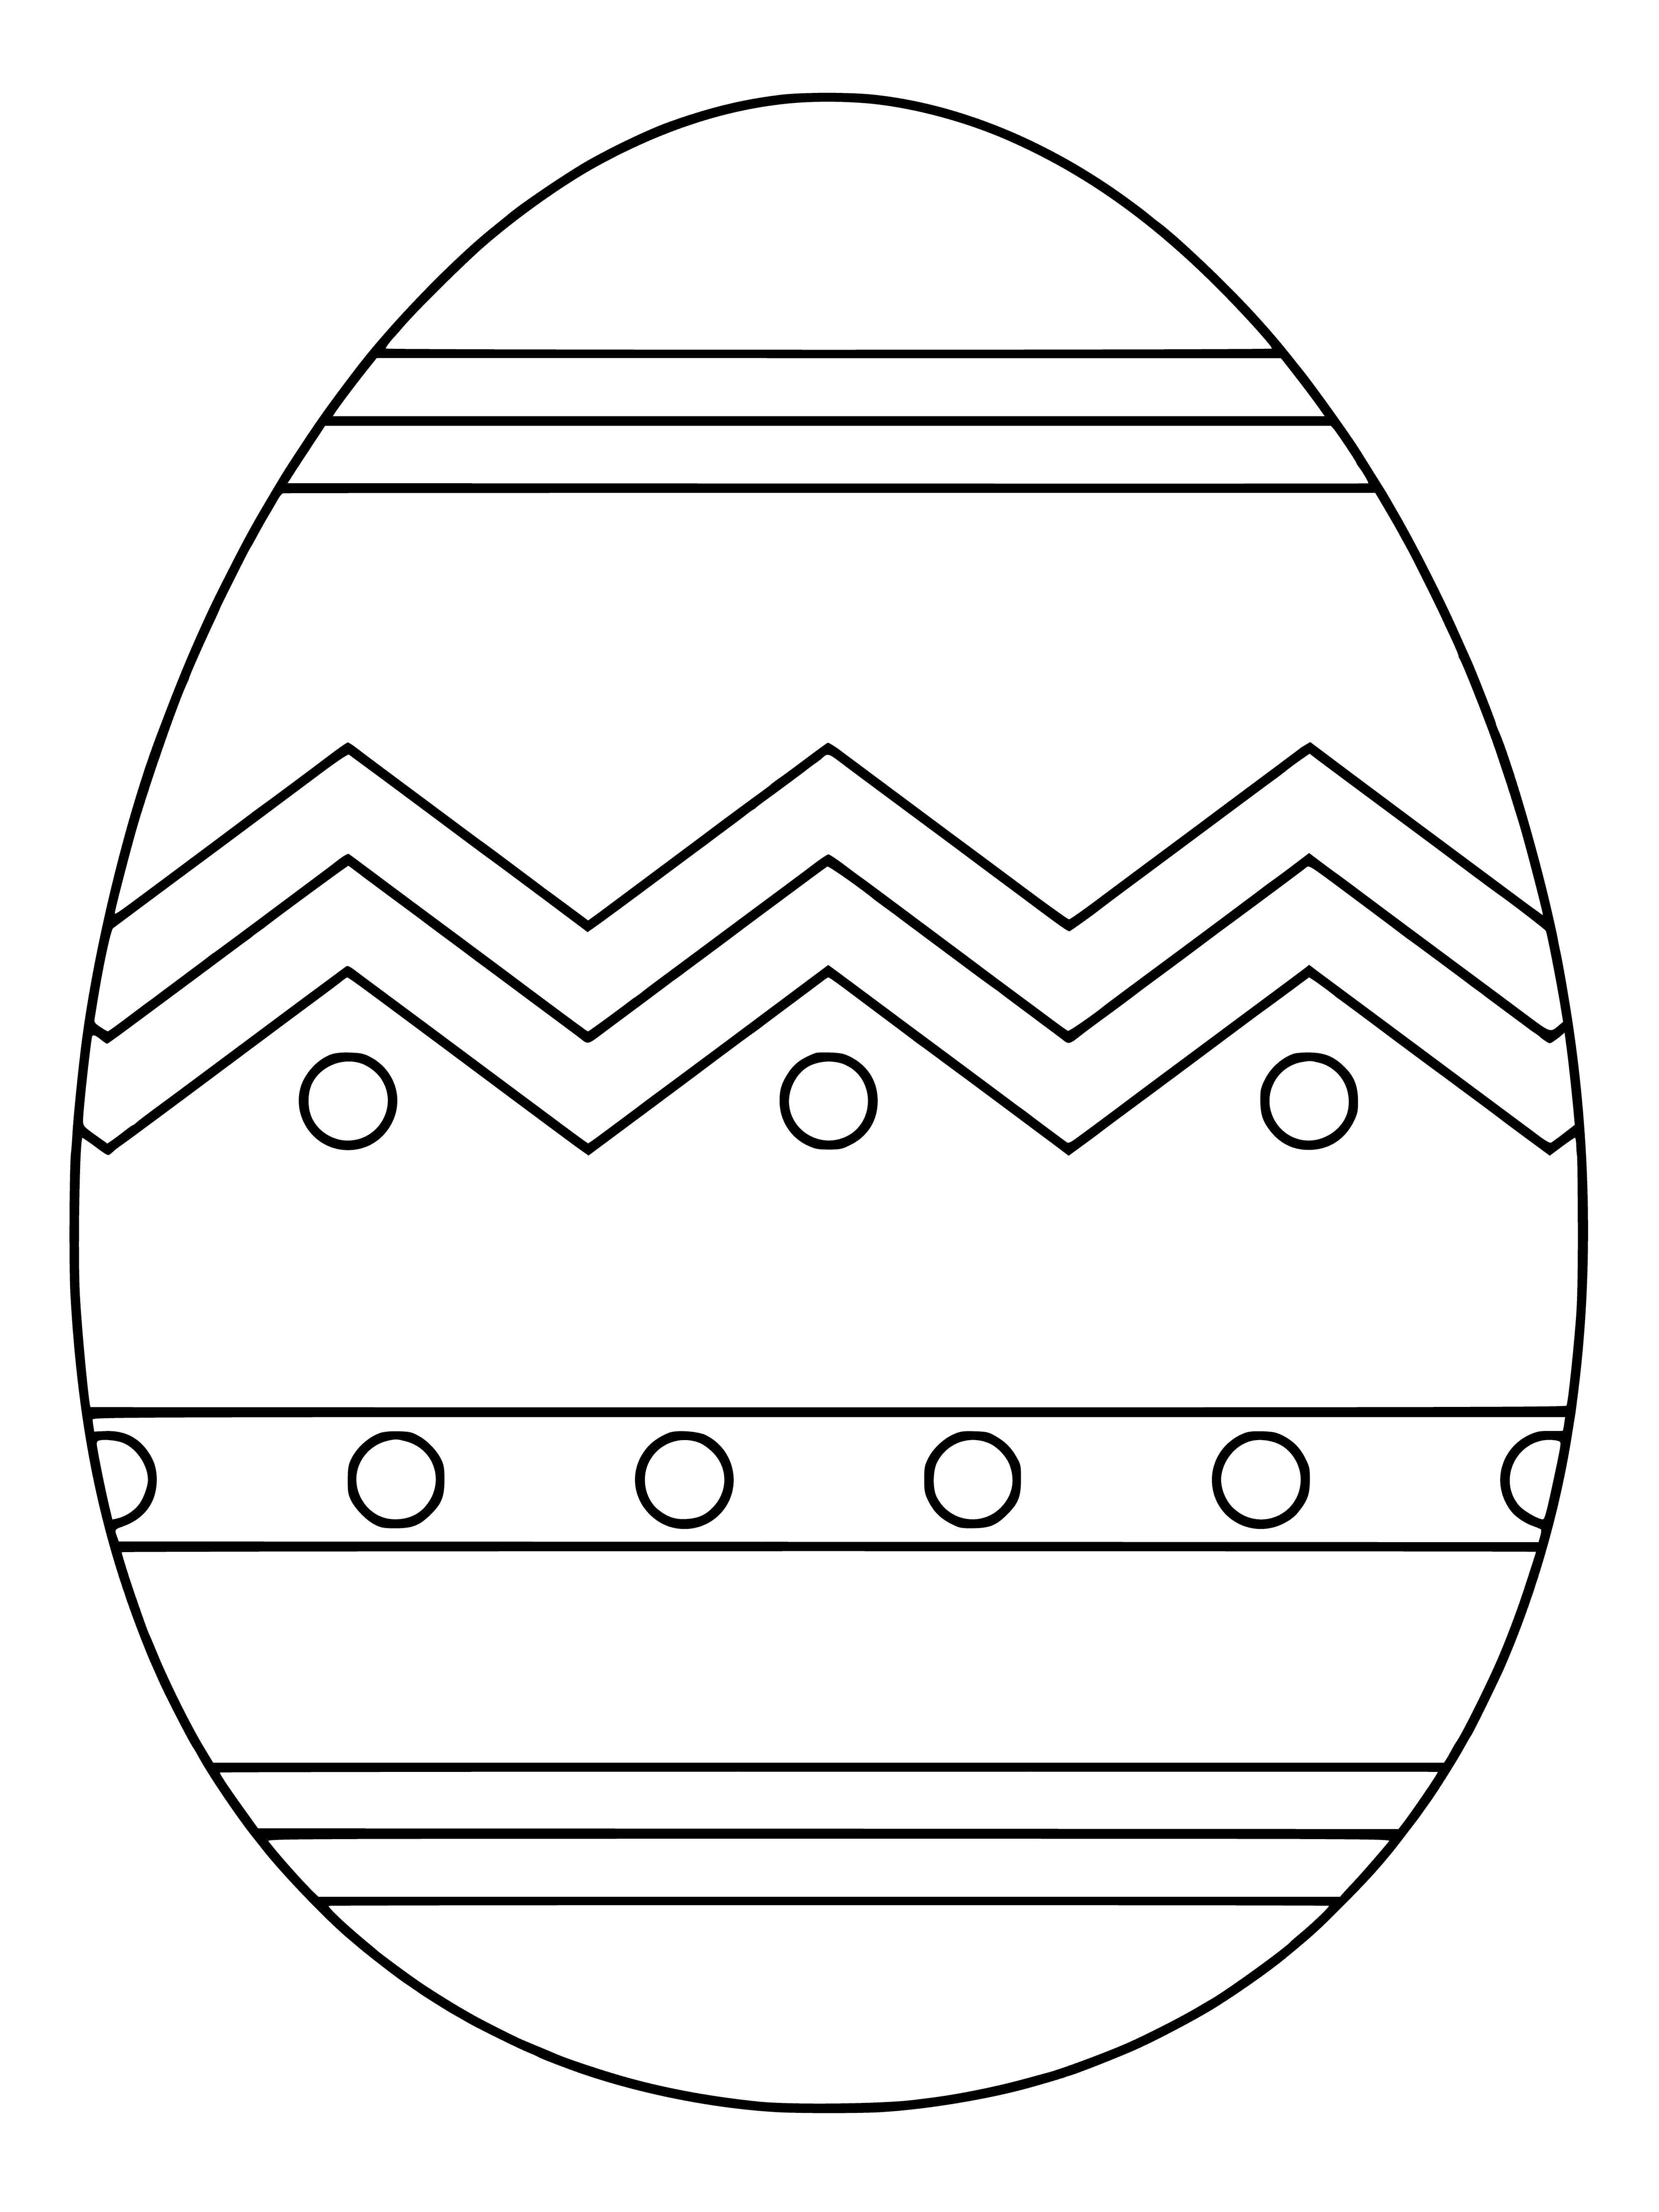 coloring page: Colorful Easter eggs spotted in a grassy field with trees in the background. Stripes & patterns adorn many of the eggs.